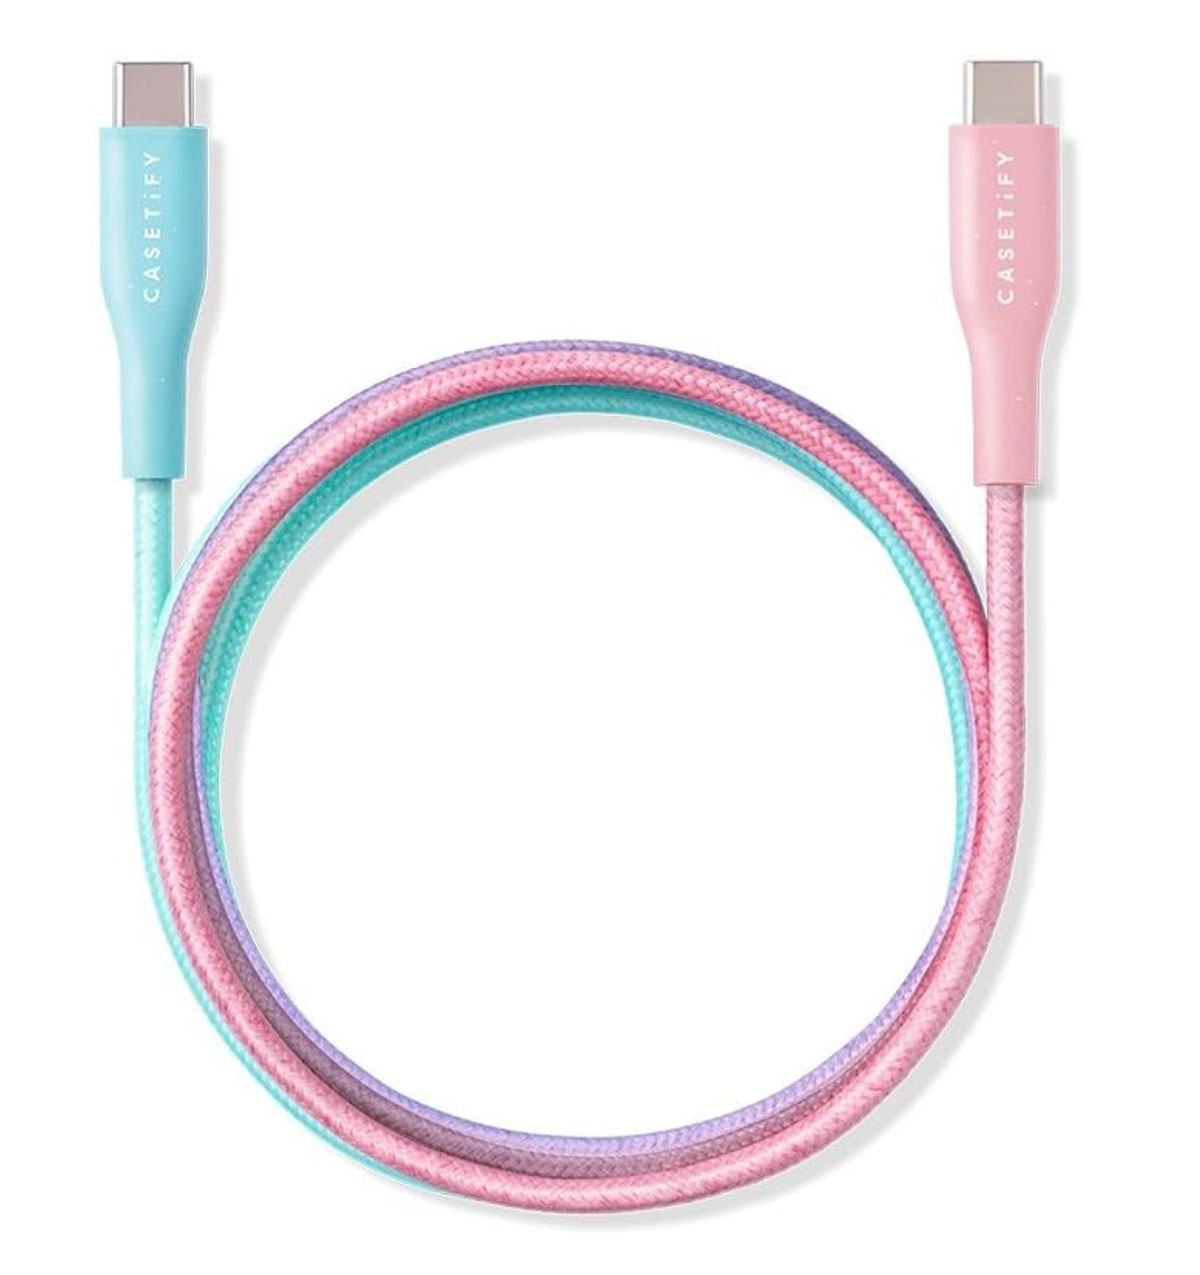 Casetify PowerThru USB-C to USB-C Cable – Fun USB-C cable